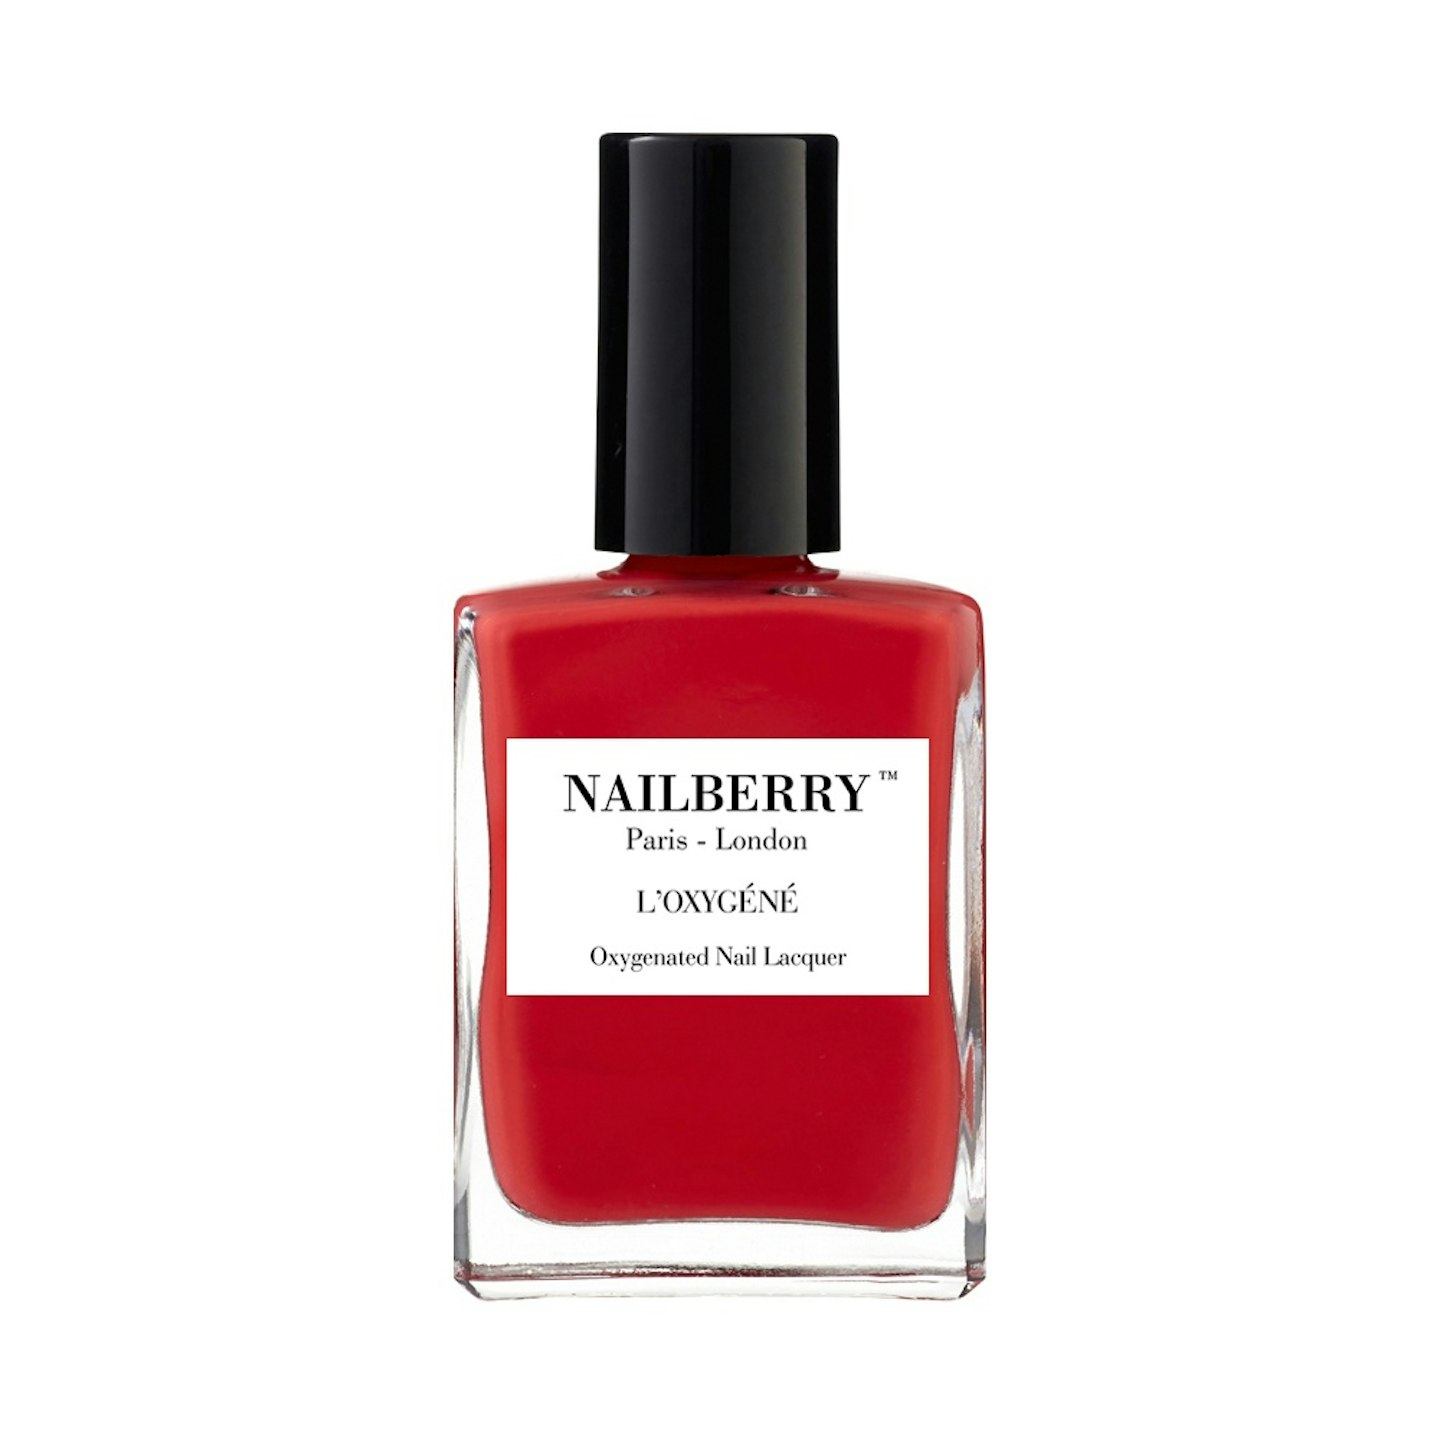 Nailberry Polish in Cherry Cherie